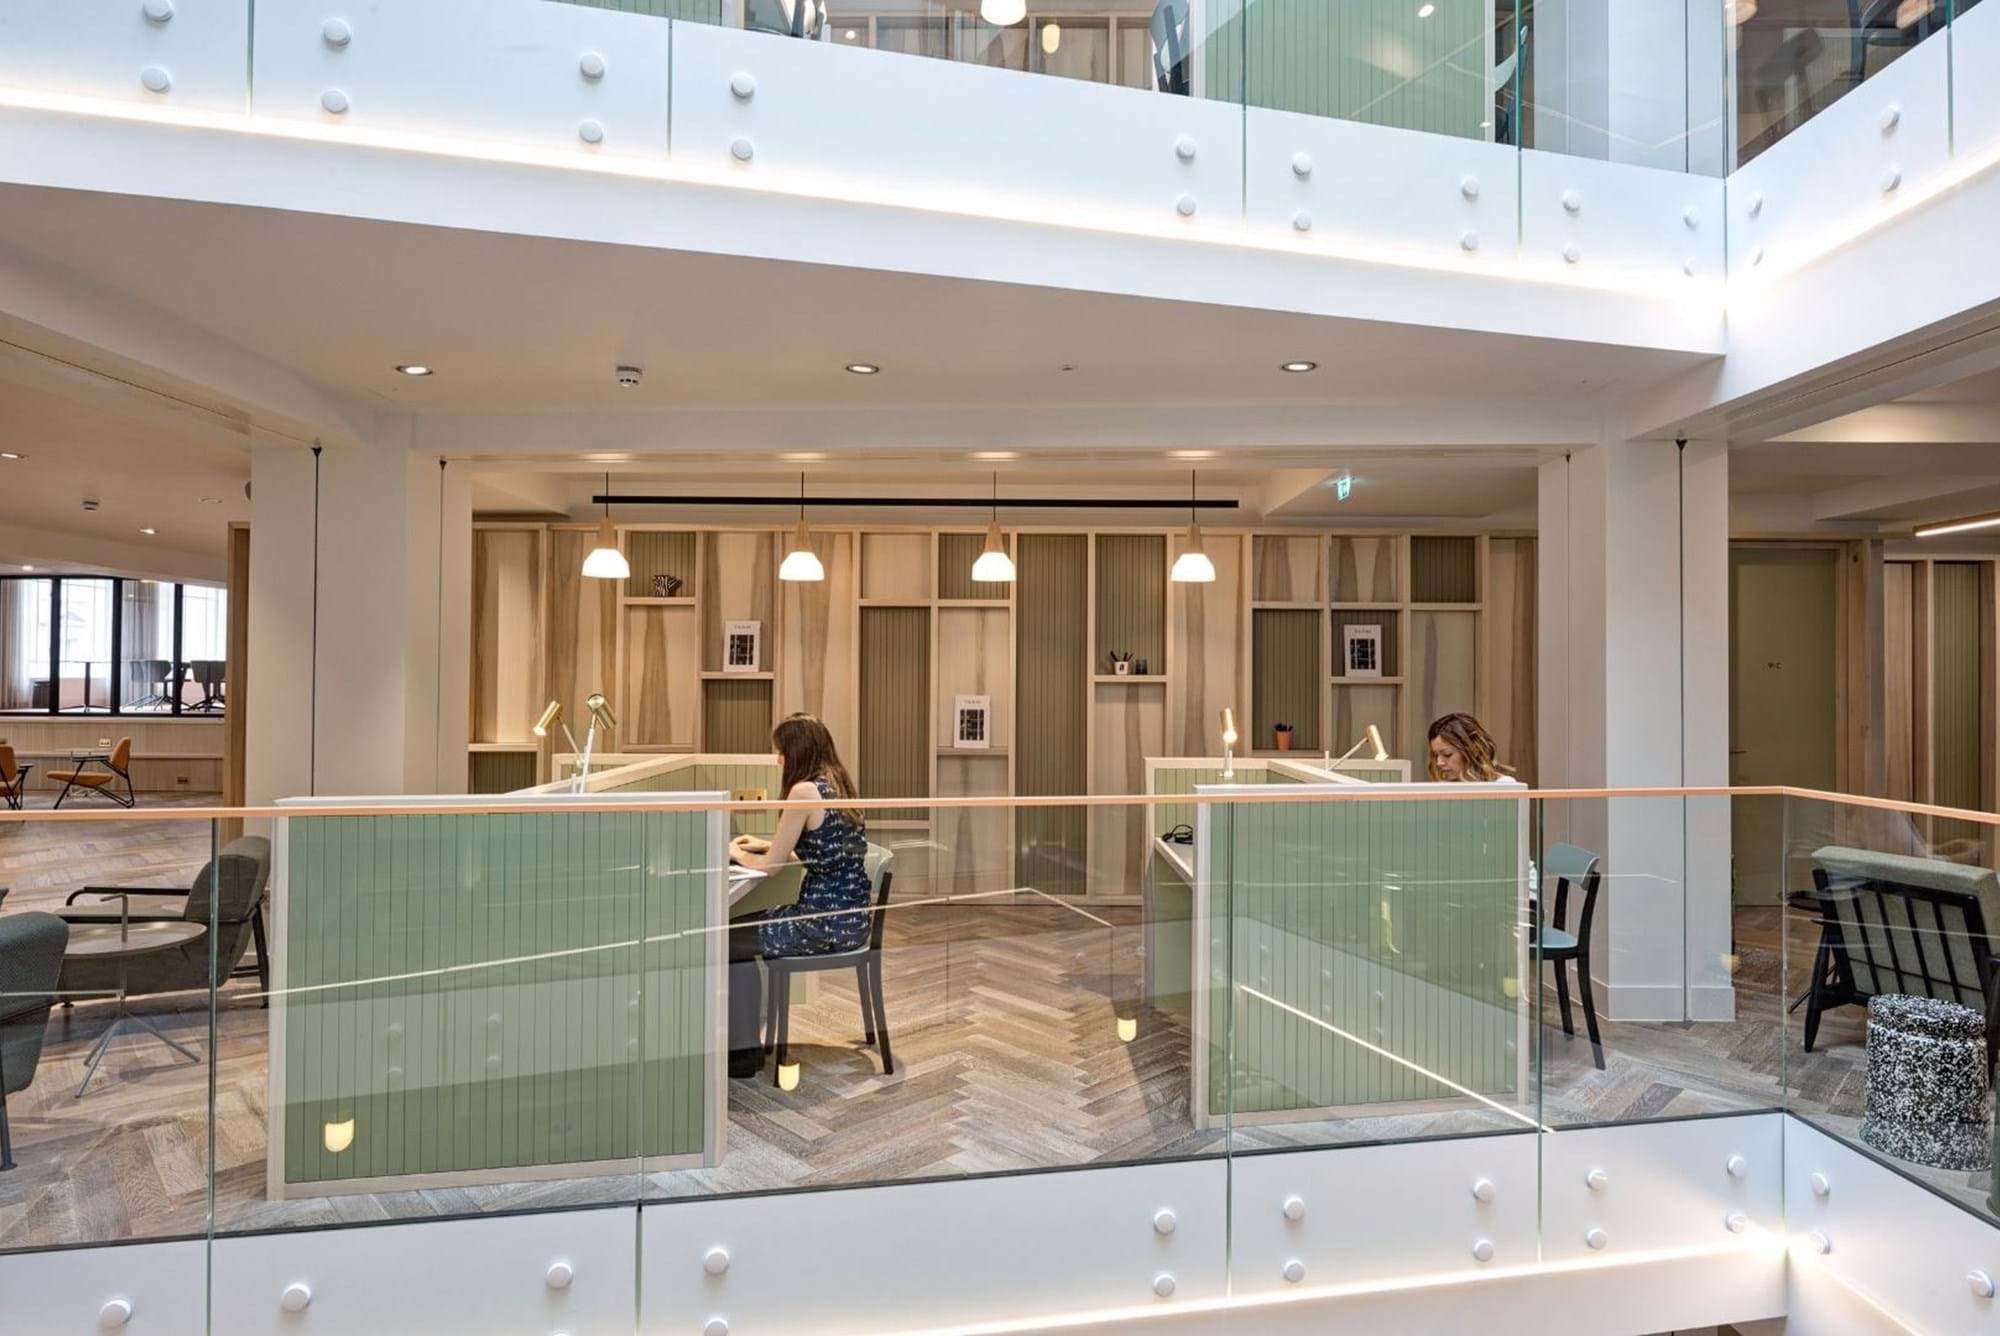 Modus Workspace office design, fit out and refurbishment - TOG - Wimpole Street - TOG Wimpole St 13 highres sRGB.jpg